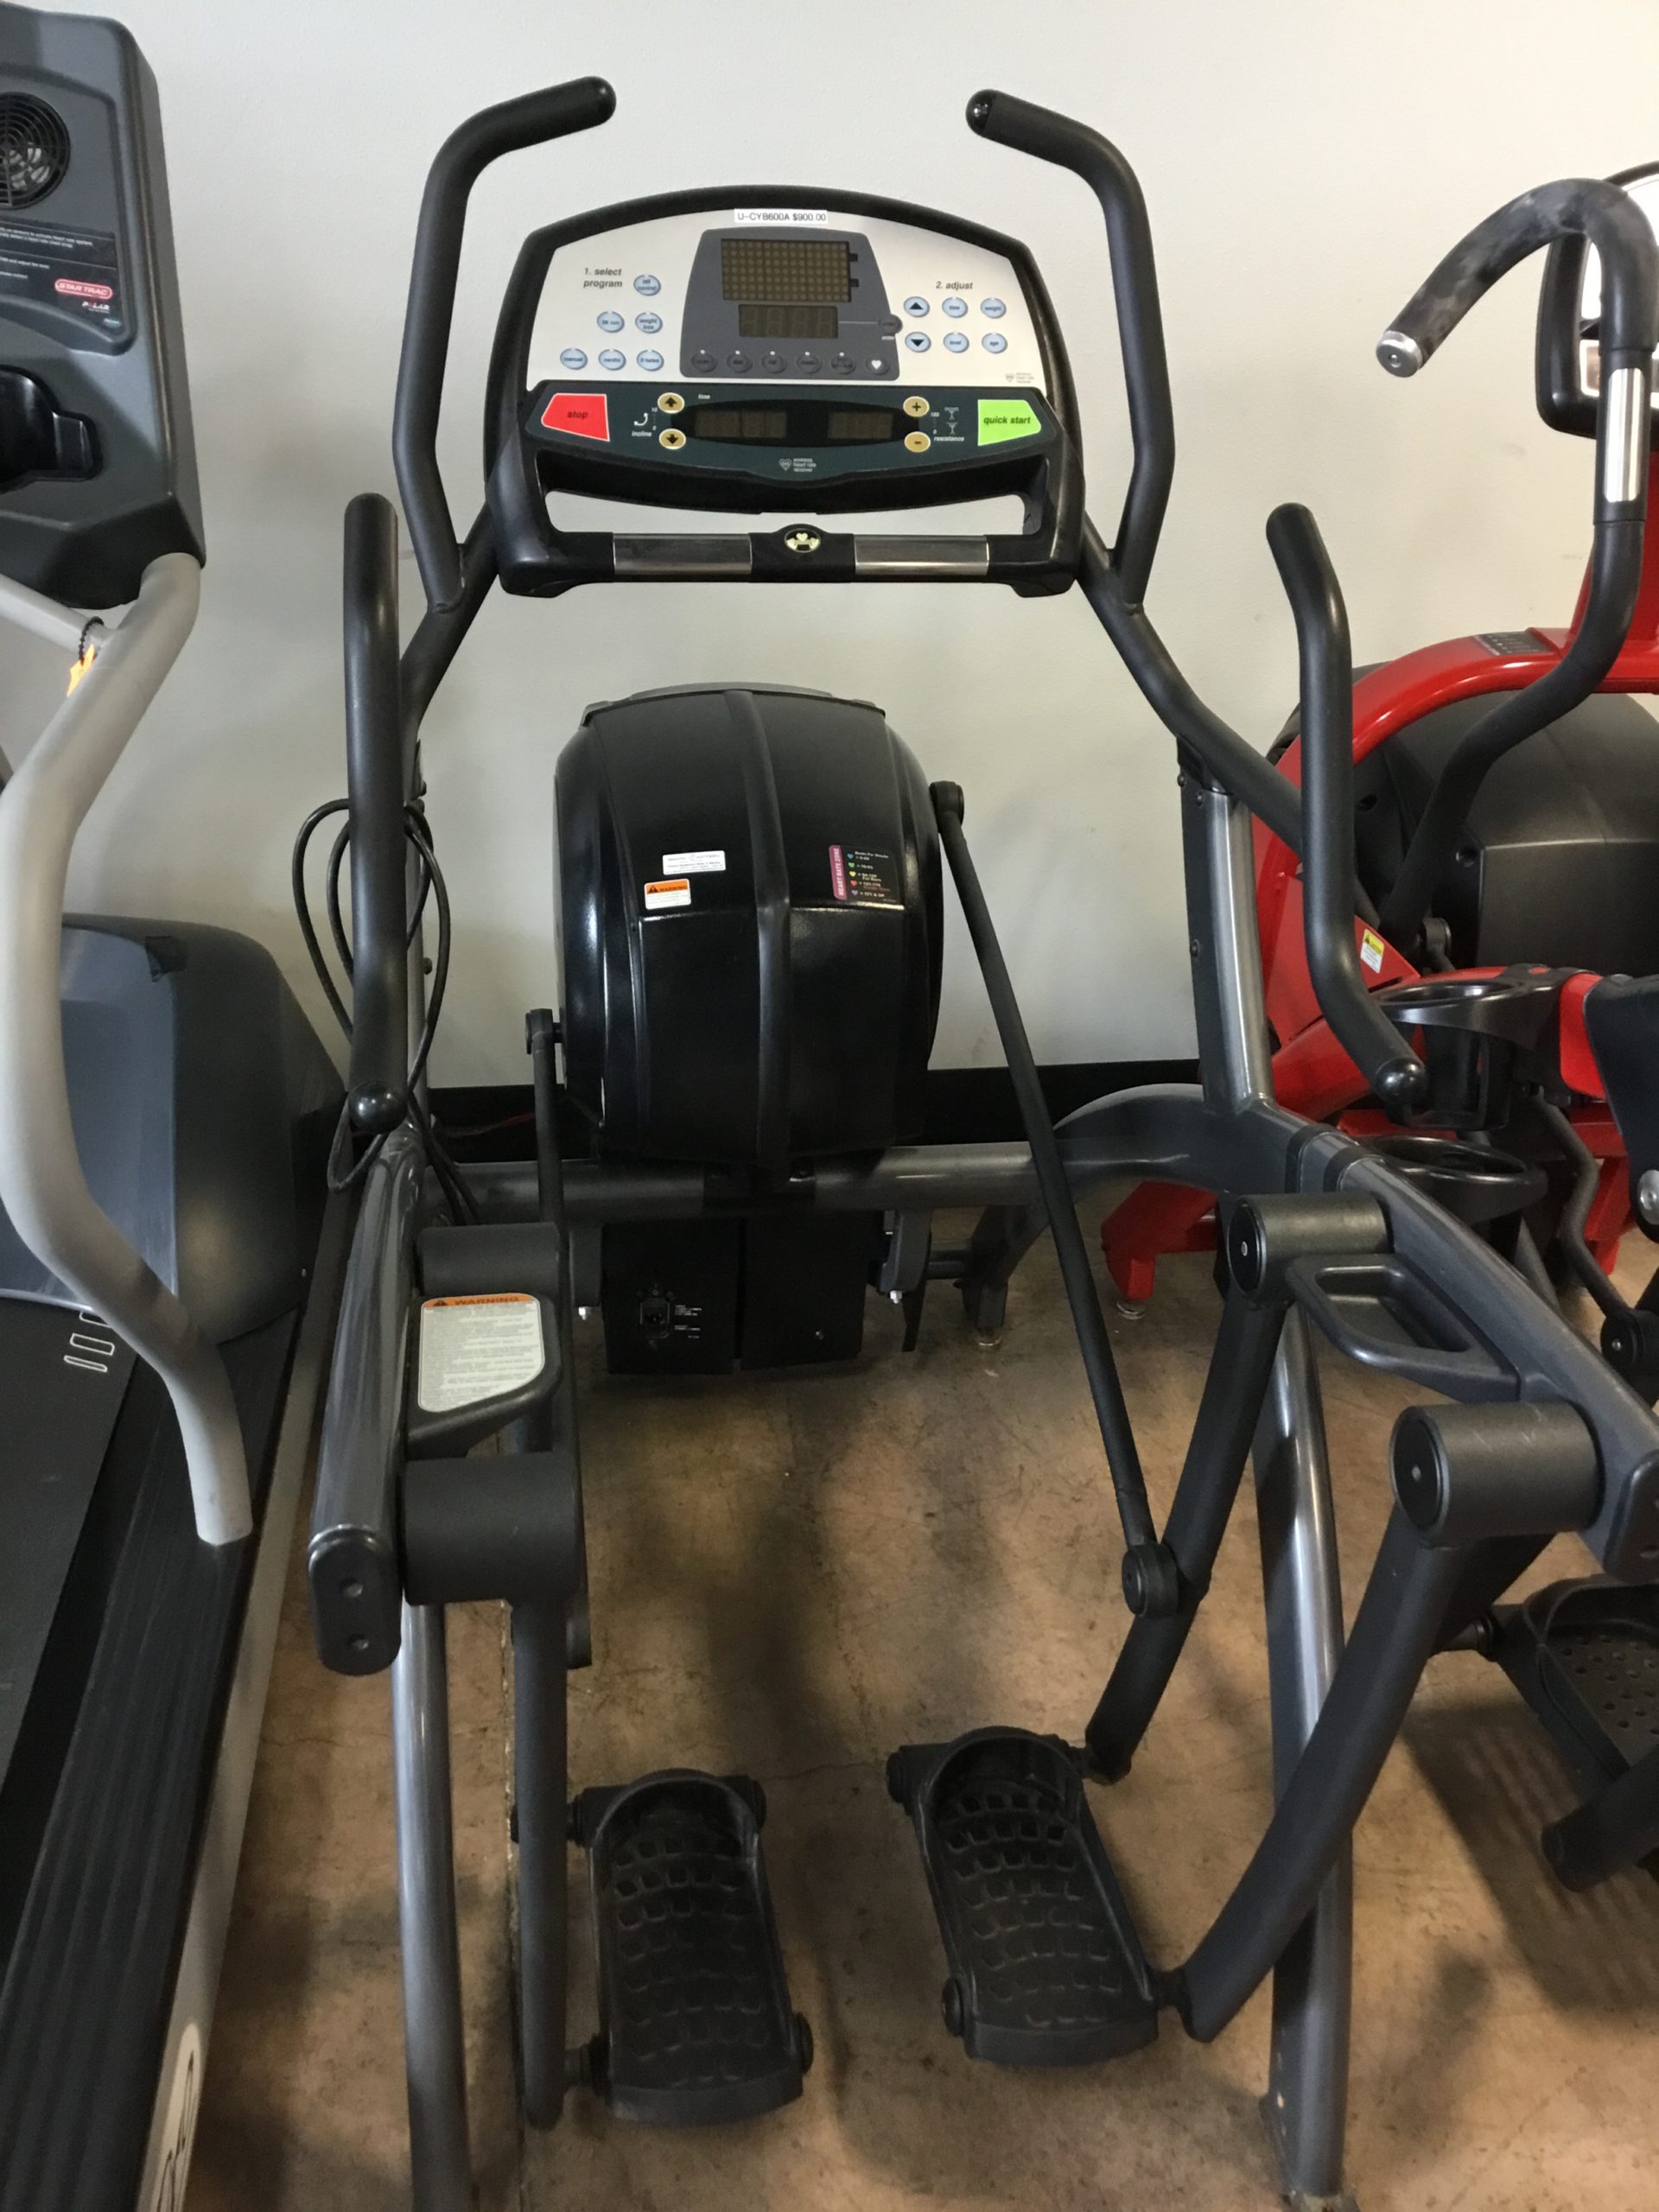 Cybex Arc Trainer 600a Back In